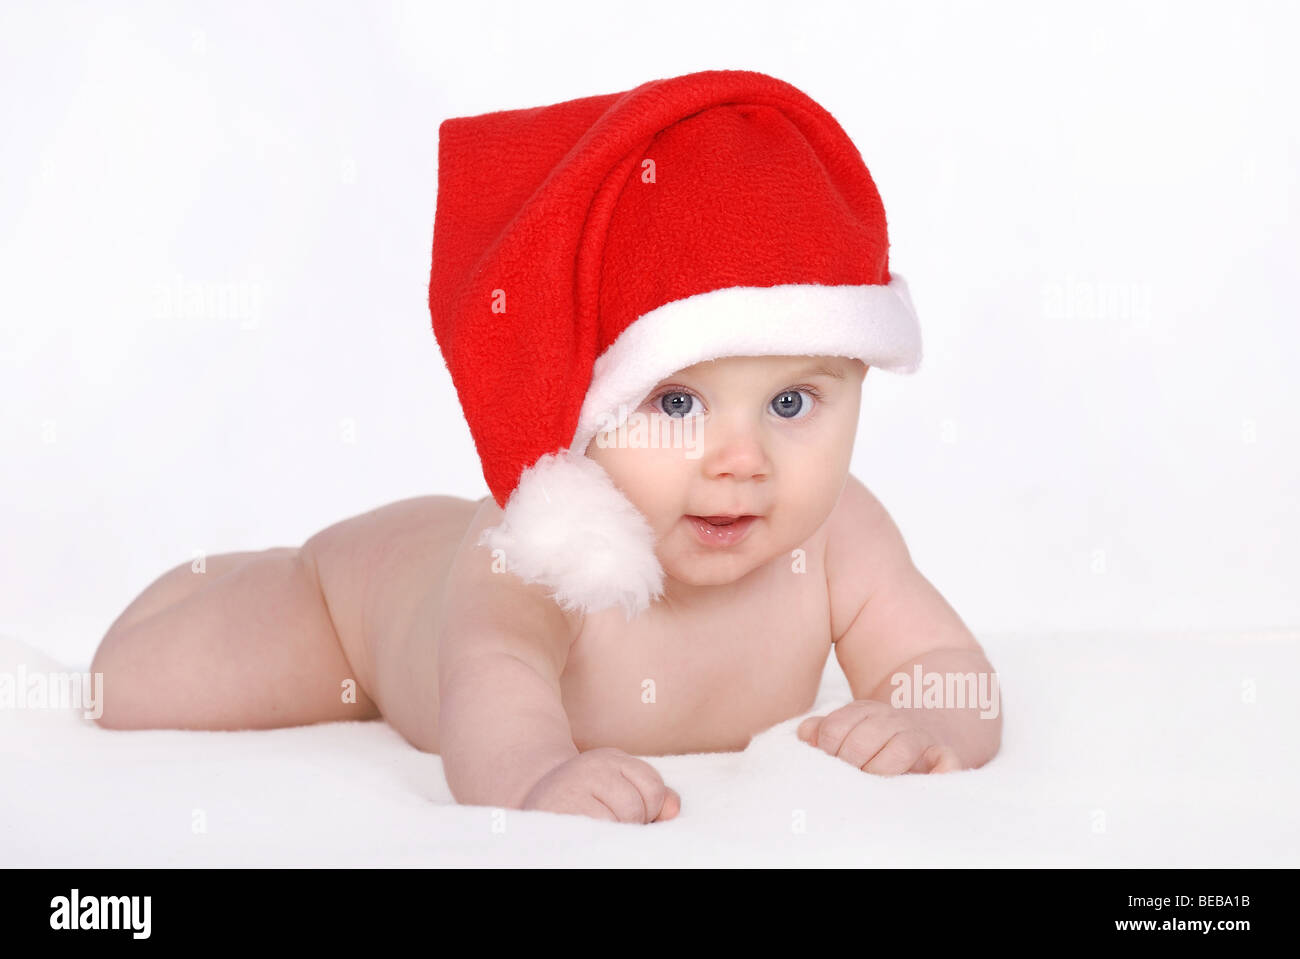 Christmas baby - Little baby portrait in red hat Stock Photo